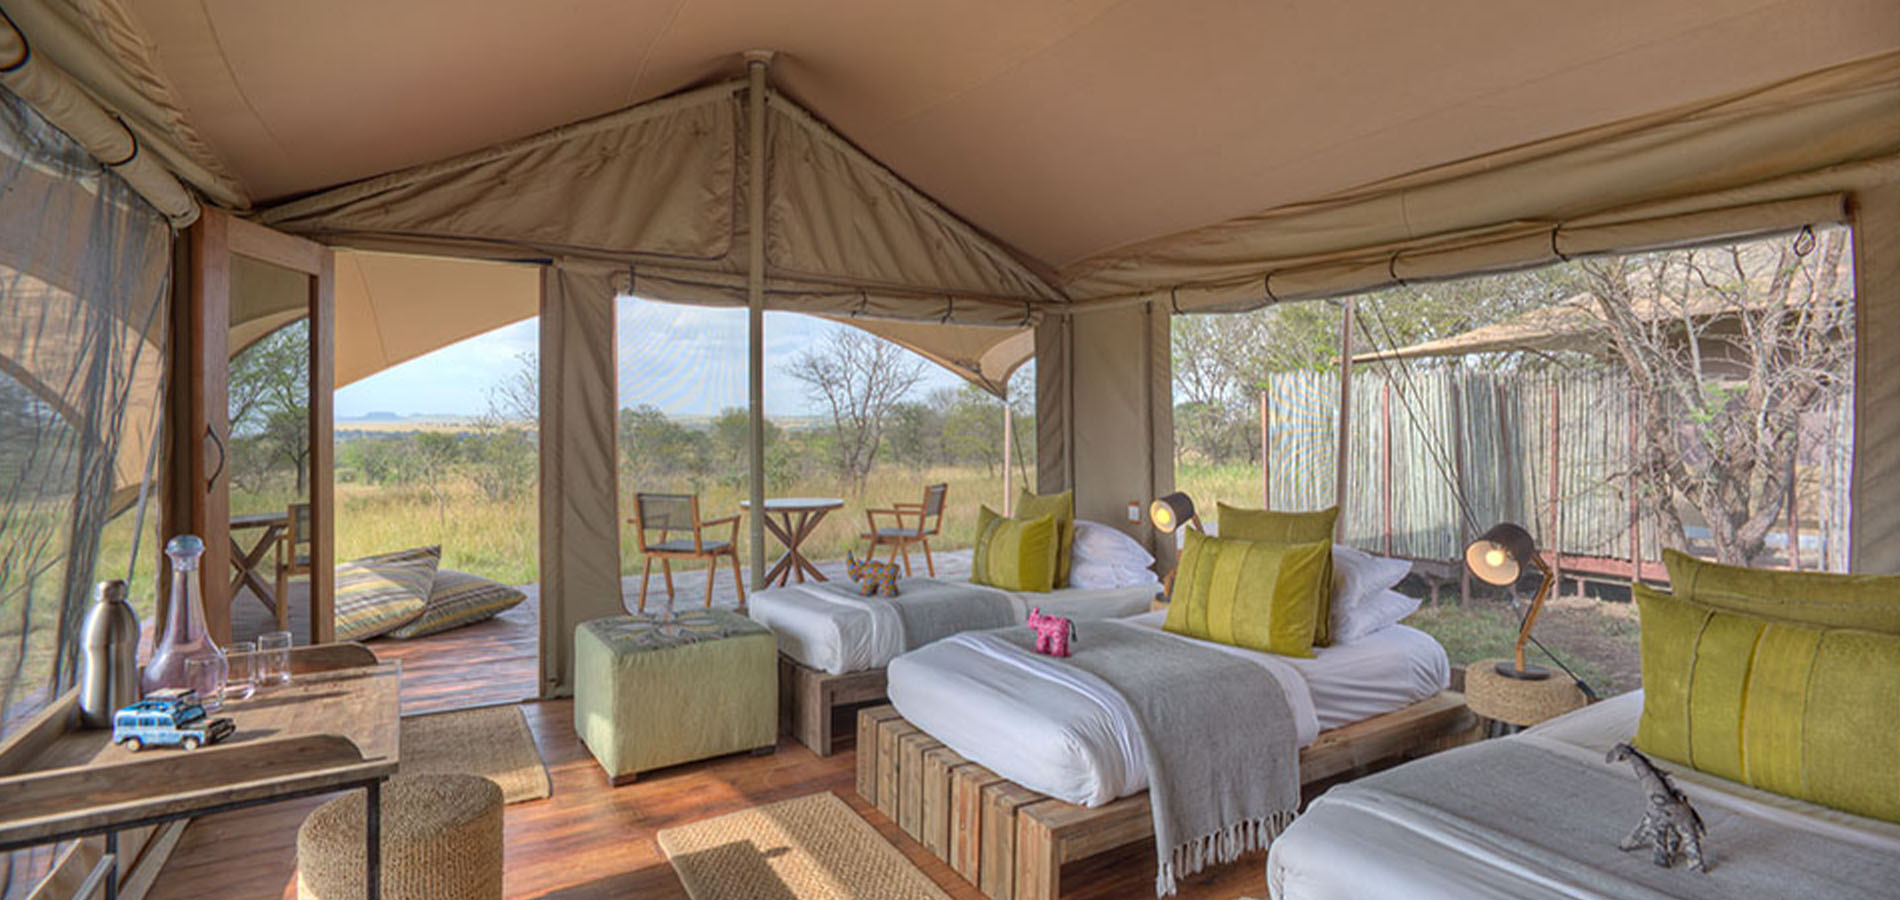 Enjoy the luxury african safari in the one of the best accommodation in <h4>serengeti Tanzania</h4> is Sayari Camp Serengeti Tanzania are in Northern Serengeti and with easy access to the migration’s Mara River crossing in serengeti.